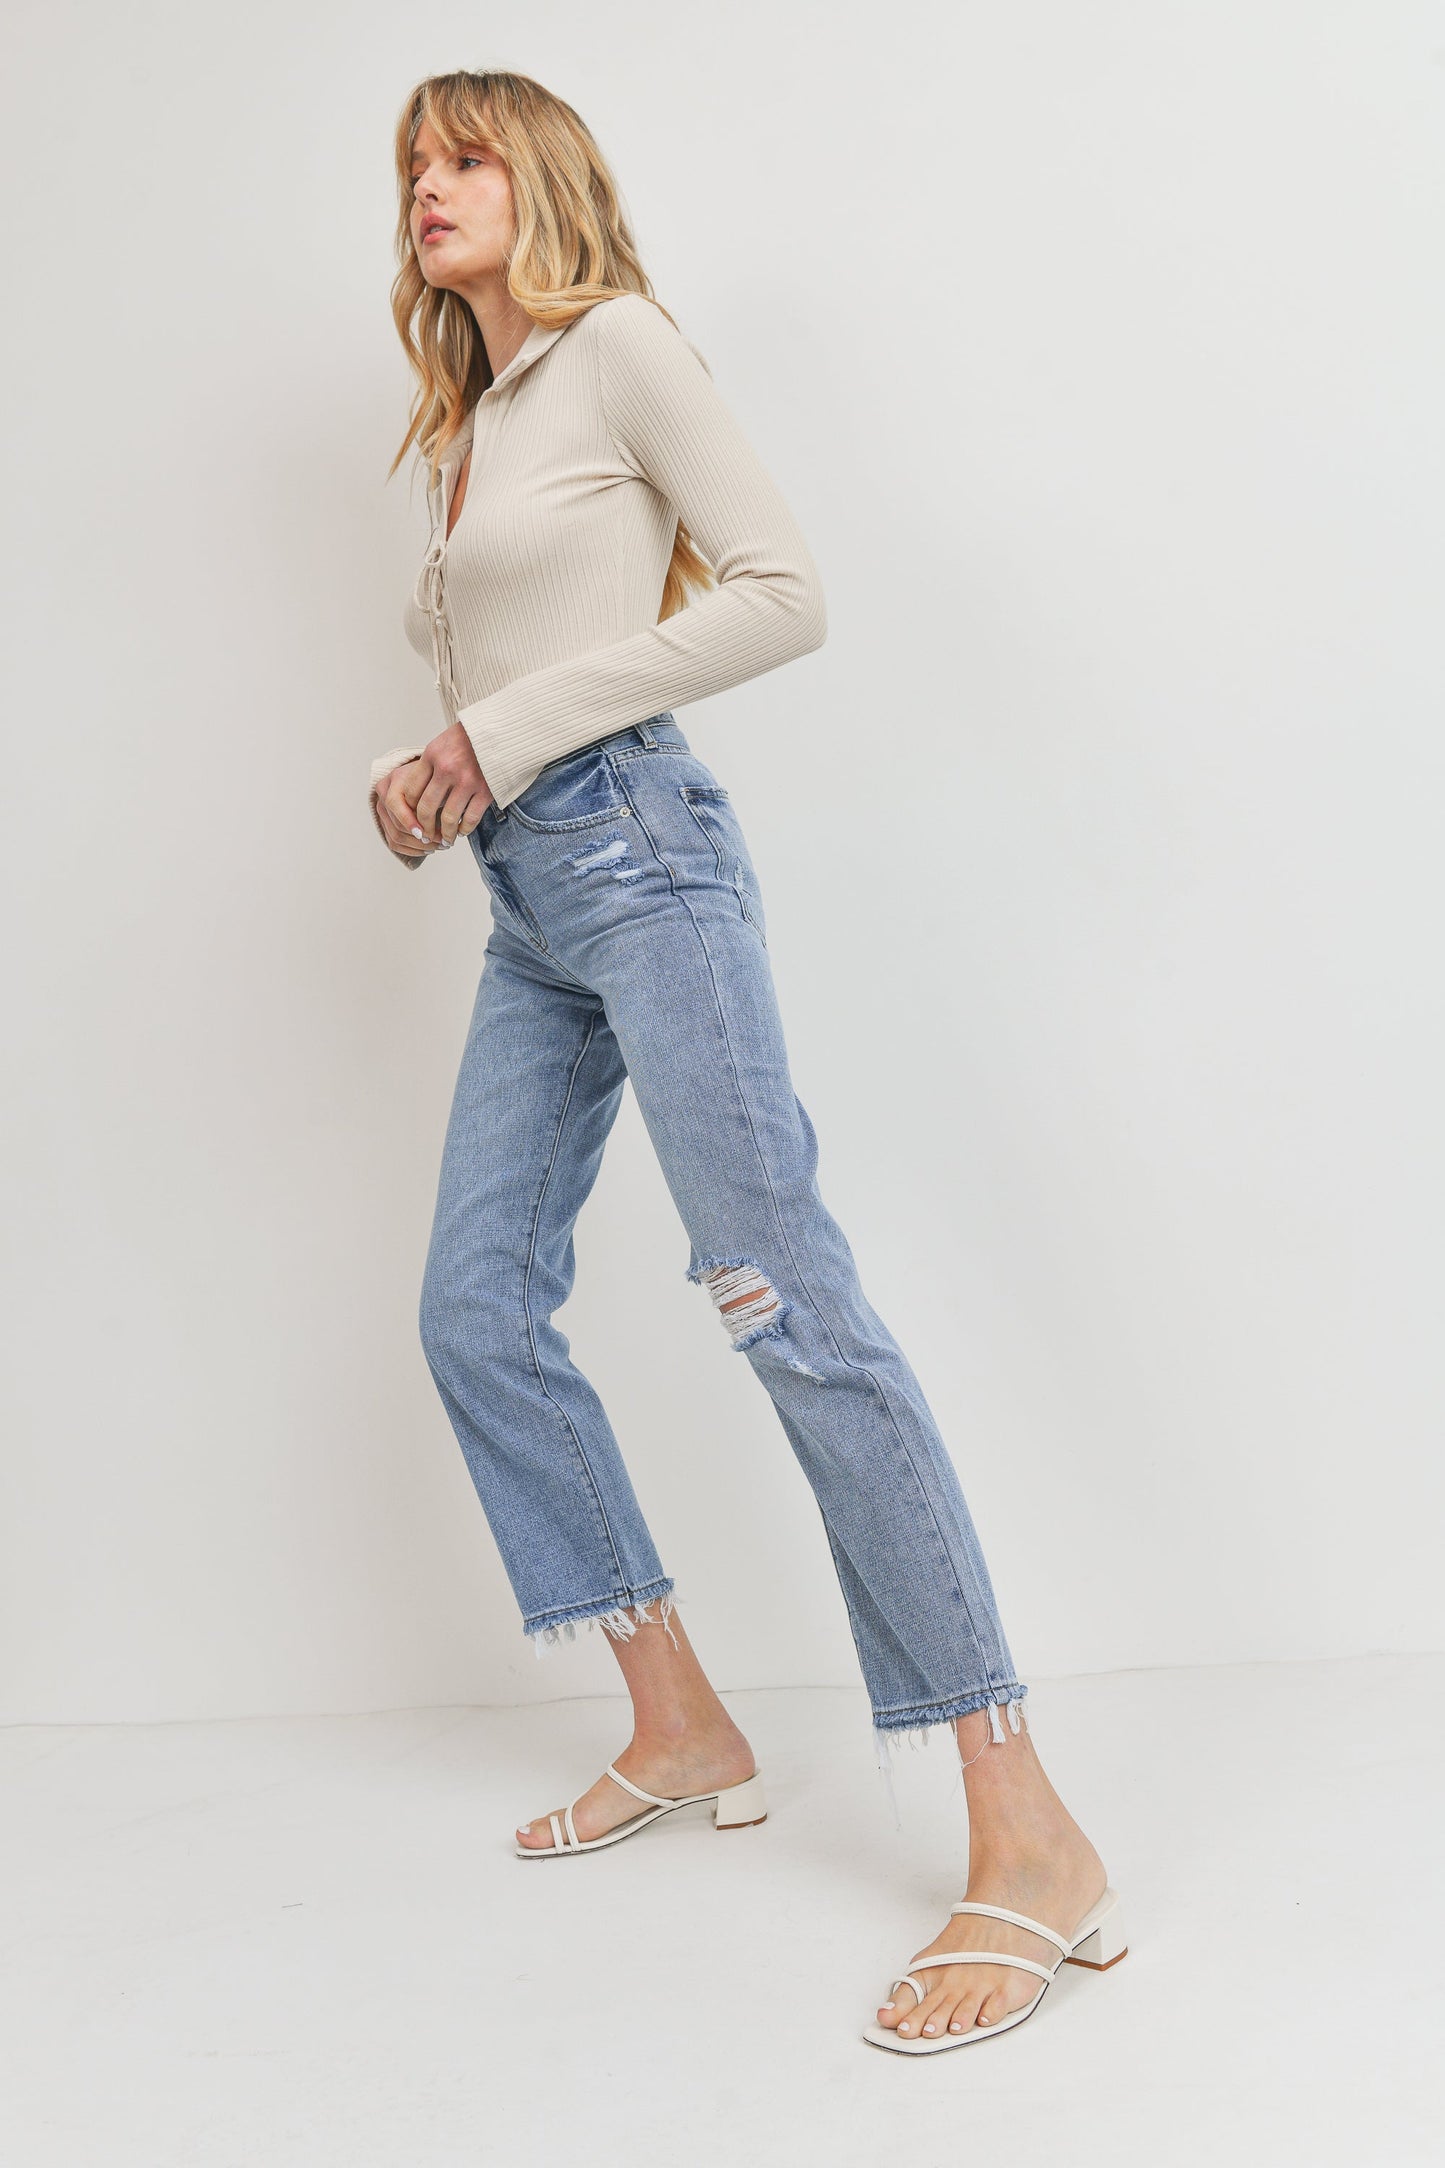 Relaxed Fit Jeans with One Knee Destruction - Casual & Edgy Denim